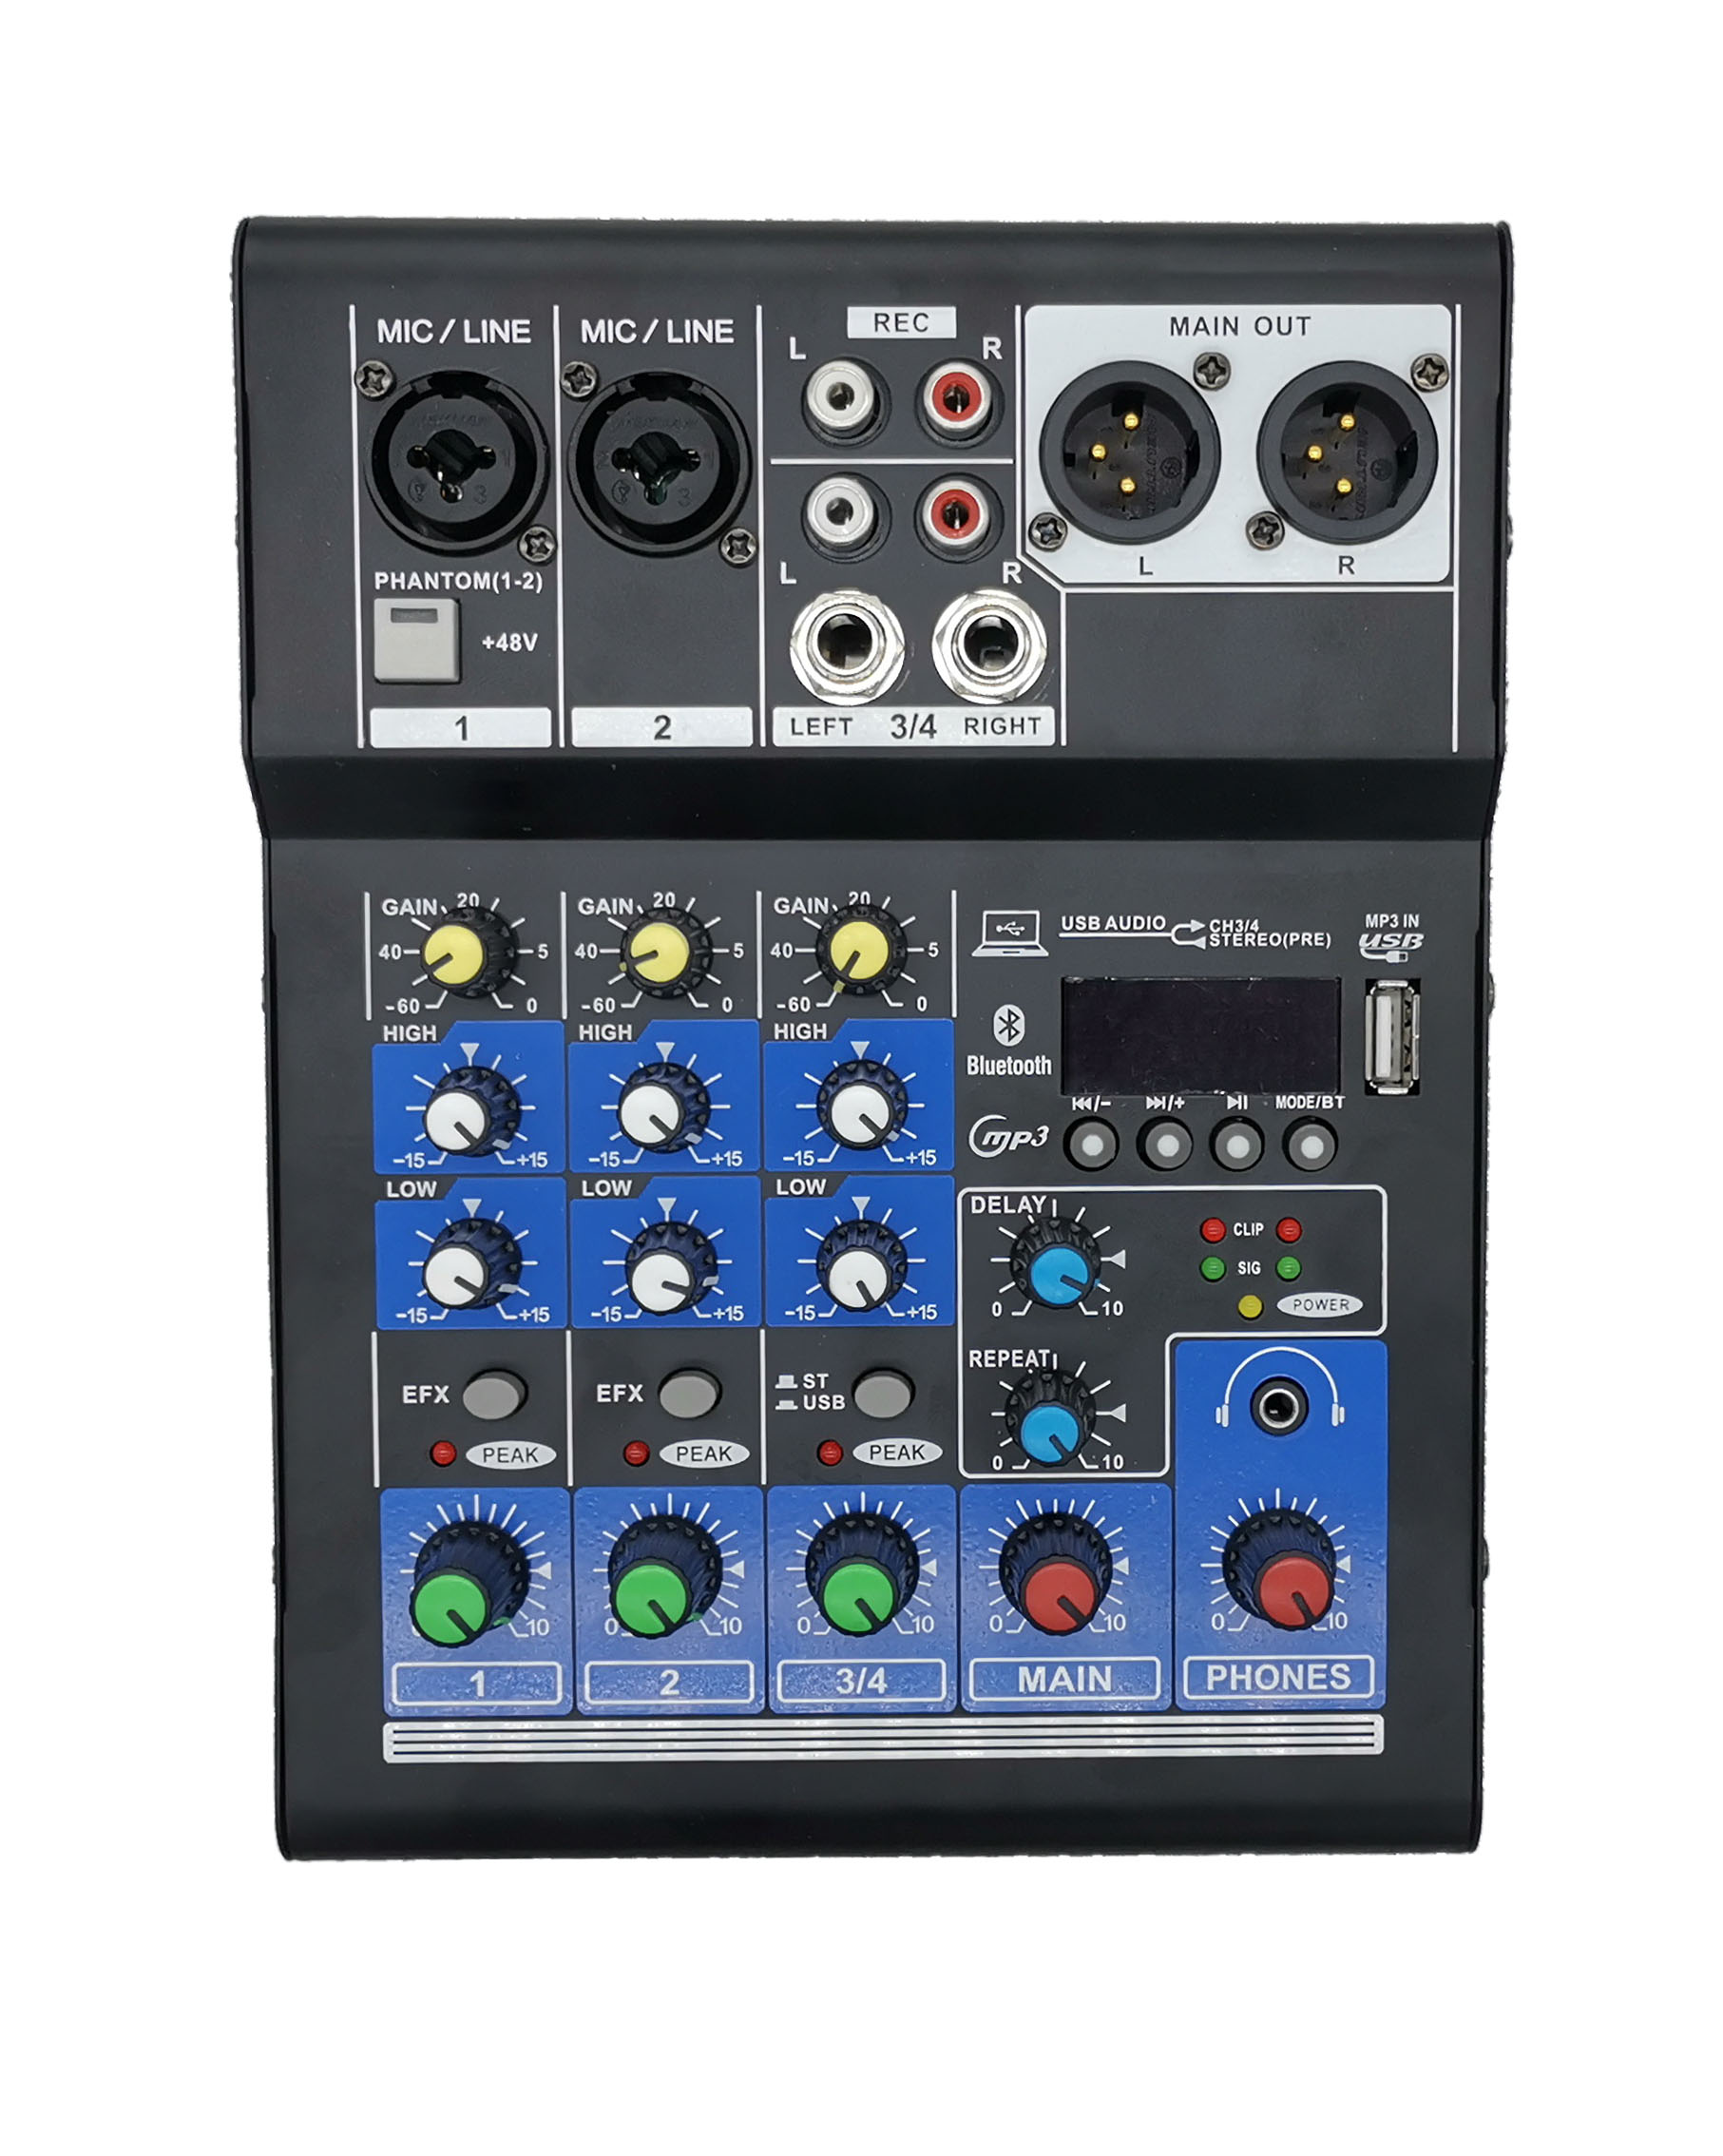 DX-04 Wholesale Cheap price sound mixer updated 6 channel series blue tooth function audio mixer console with USB mini dj mixer